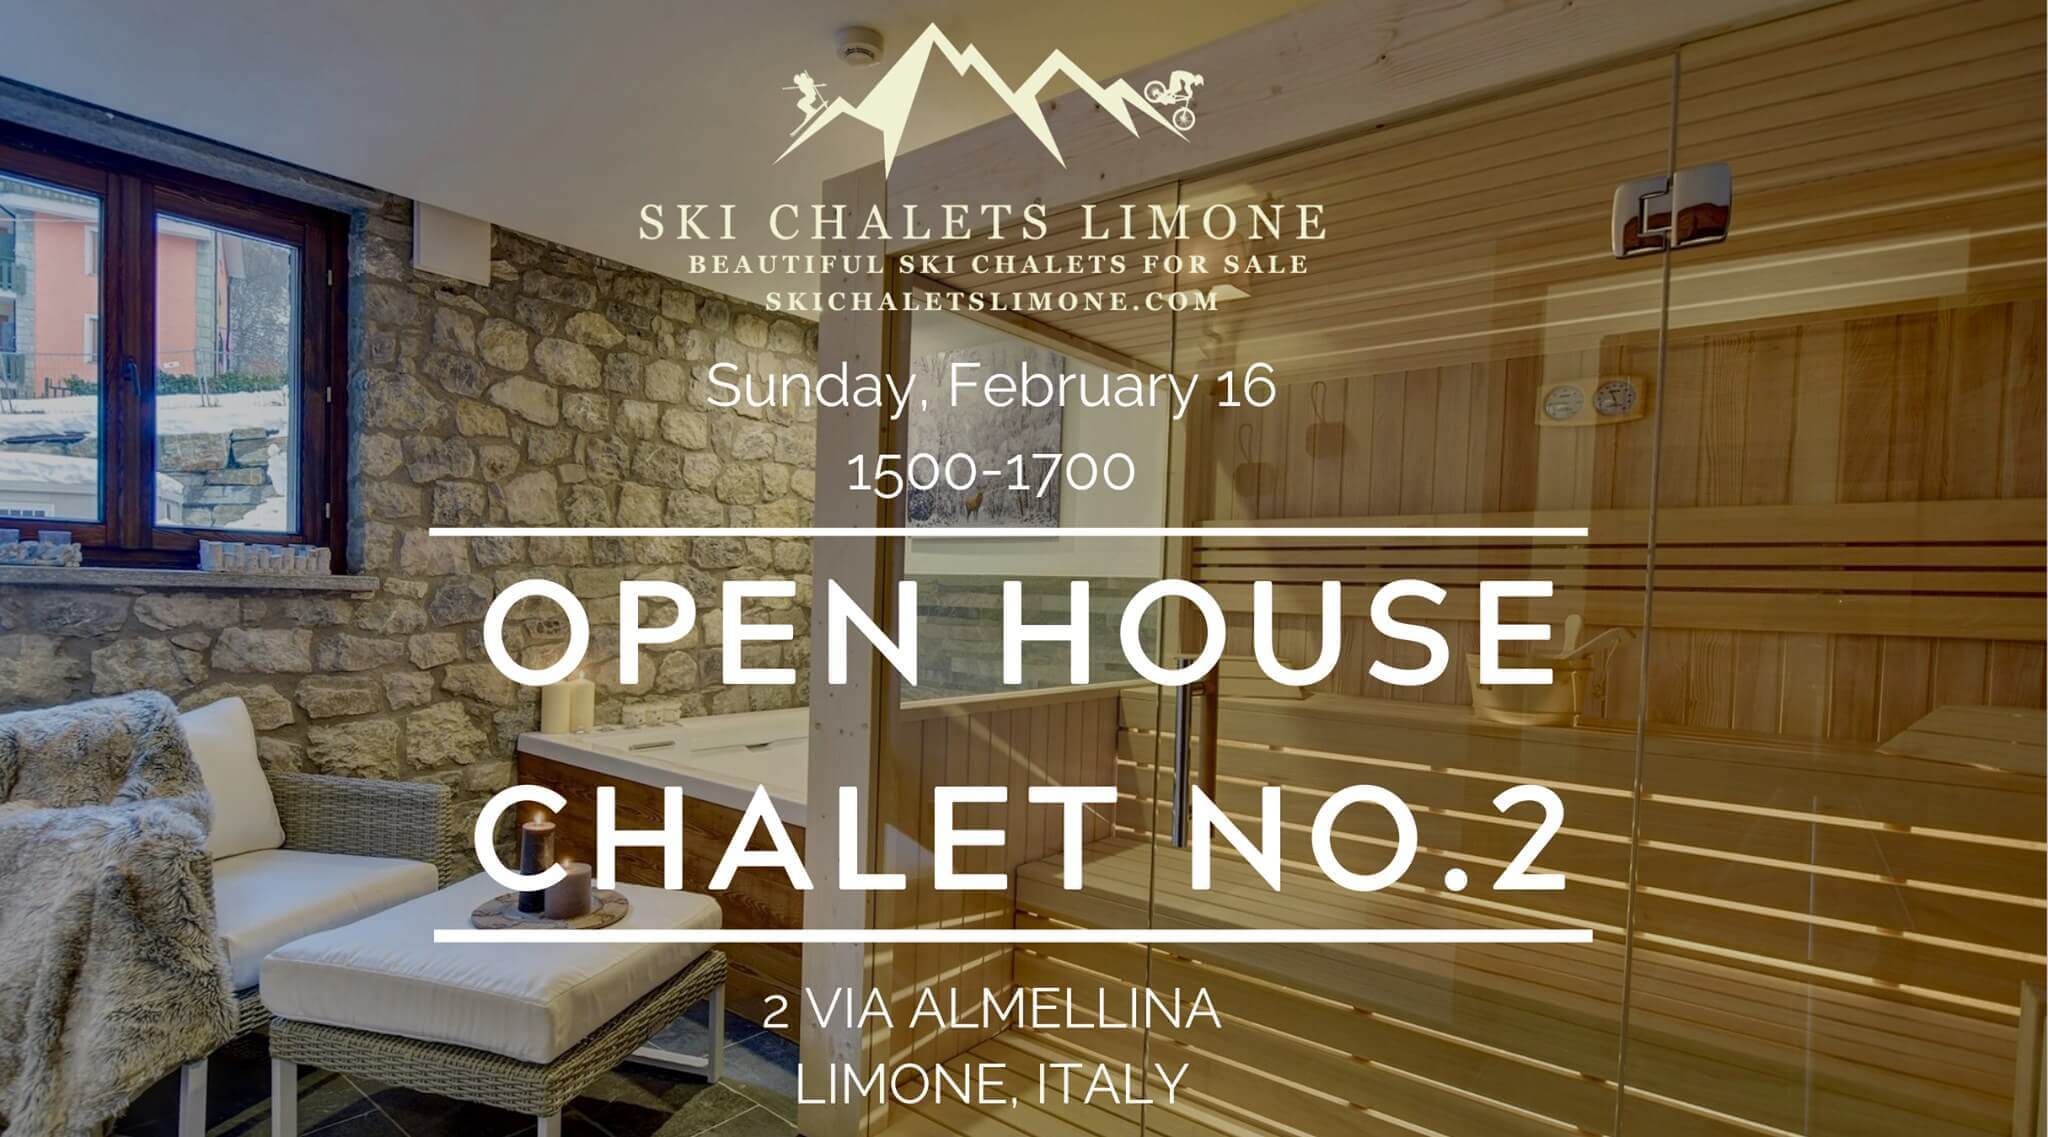 Invitation of the open house